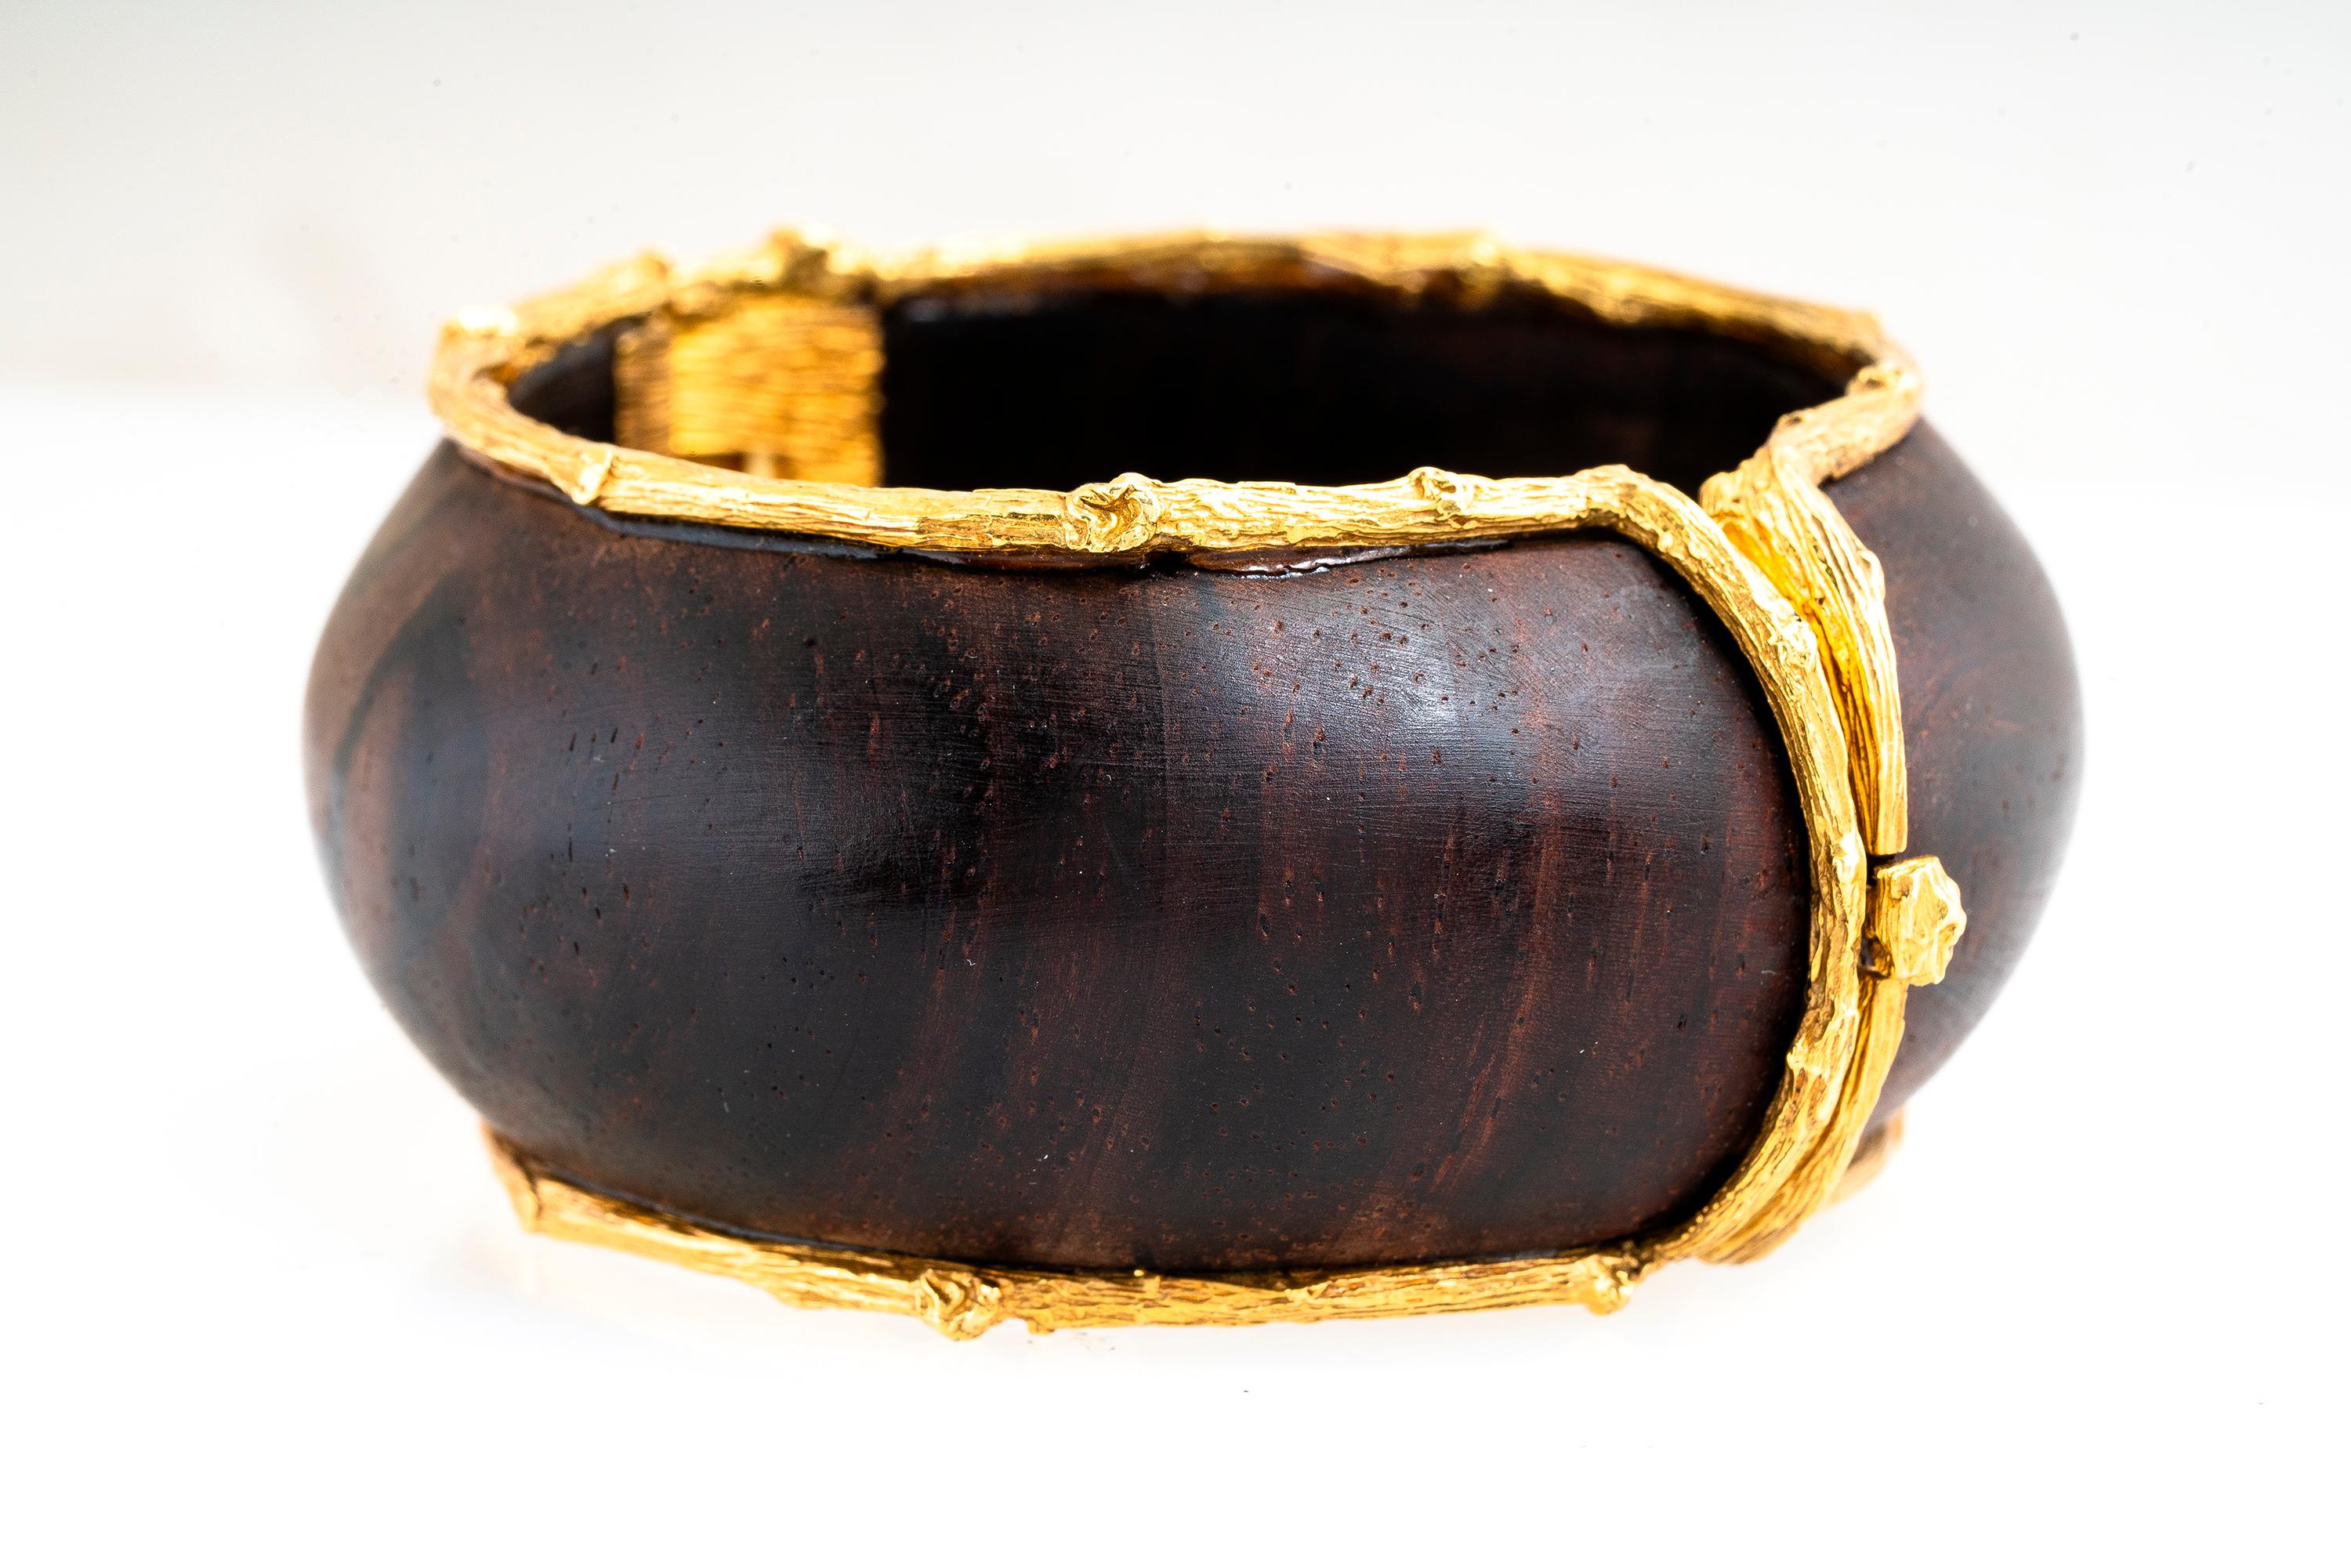 Vintage 18k yellow gold and cocobolo wood twig bamboo bangle bracelet by K. Brunini Jewels.  Bracelet is 1.25 inches wide and will fit a 6-6.25 inch wrist.  Wood grain detailing in the gold trim. Original retail was over $10k.  